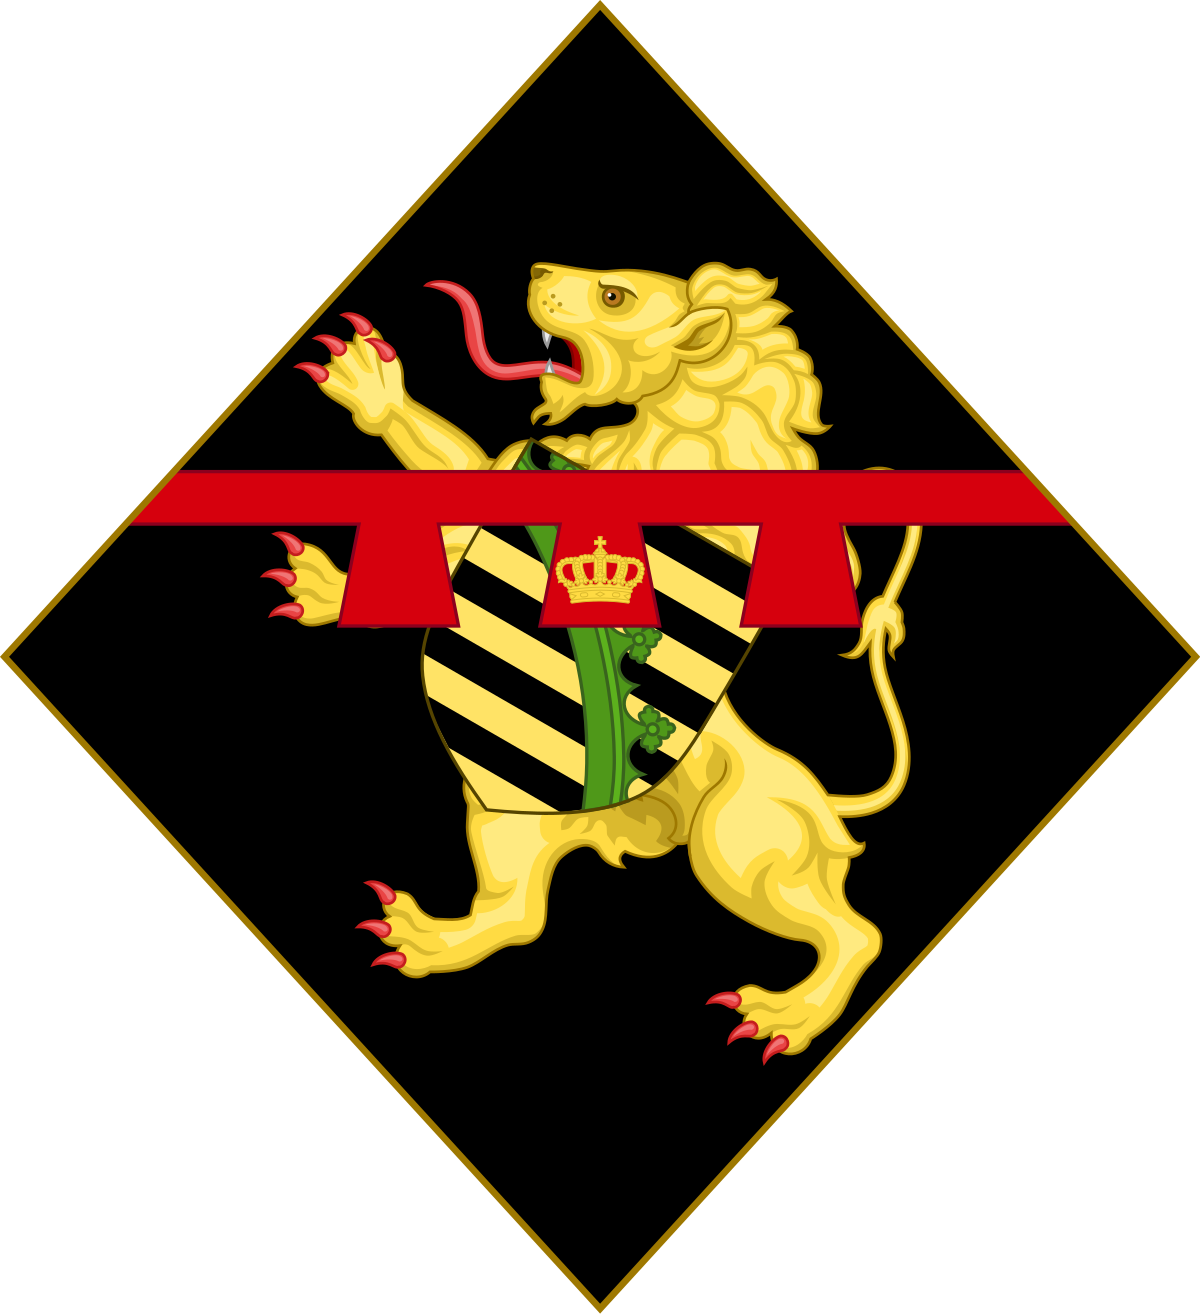 Download Bestand:Arms of a former Queen of the Belgians.svg - Wikipedia